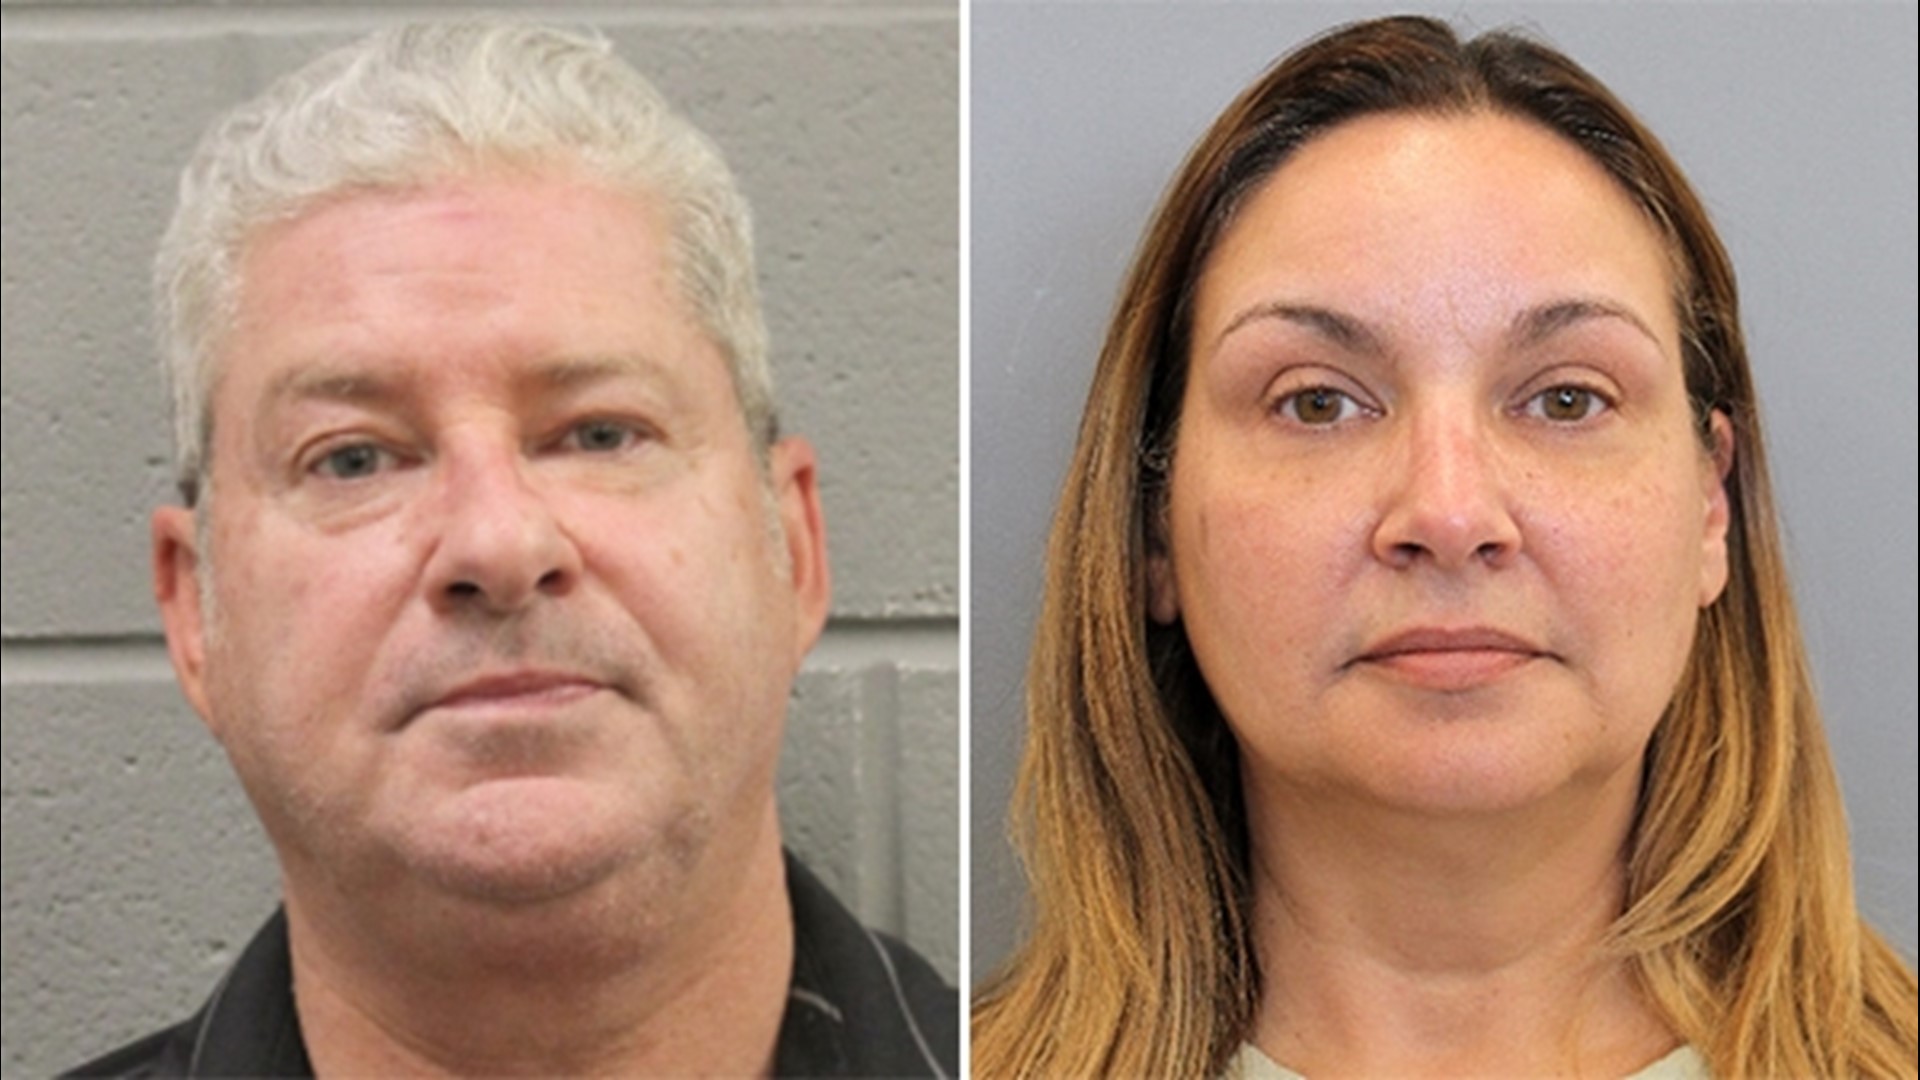 Aleck Miller and his wife Andrea Miller, of Katy, own AM2 Construction and are accused of stealing from clients in Katy, Sugar Land, Cypress and Friendswood.